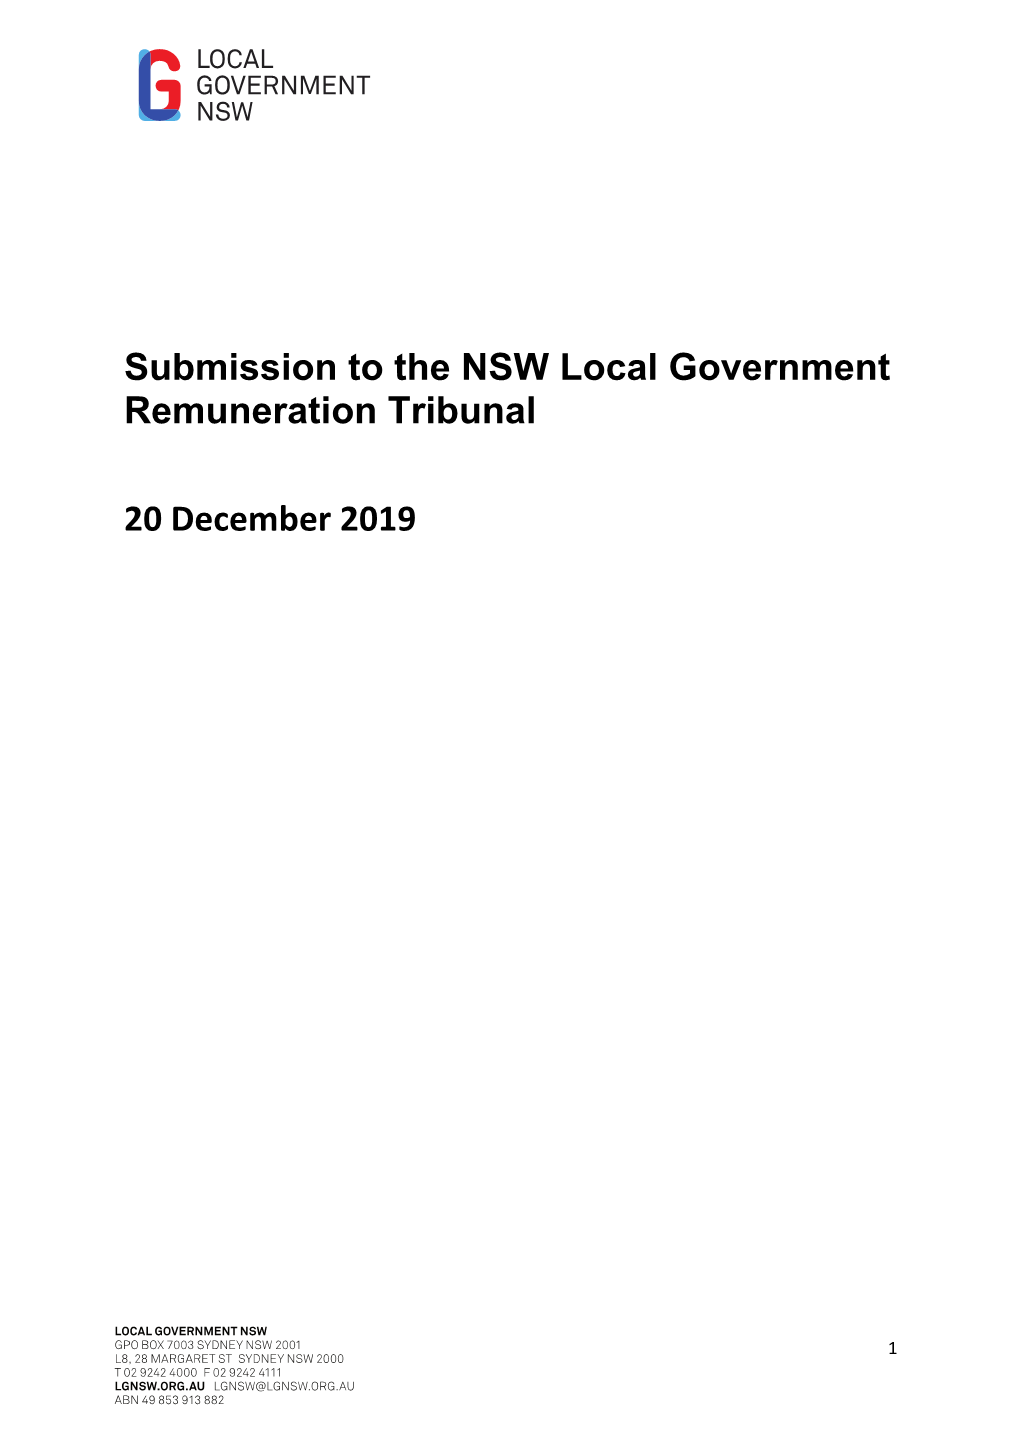 Submission to the NSW Local Government Remuneration Tribunal